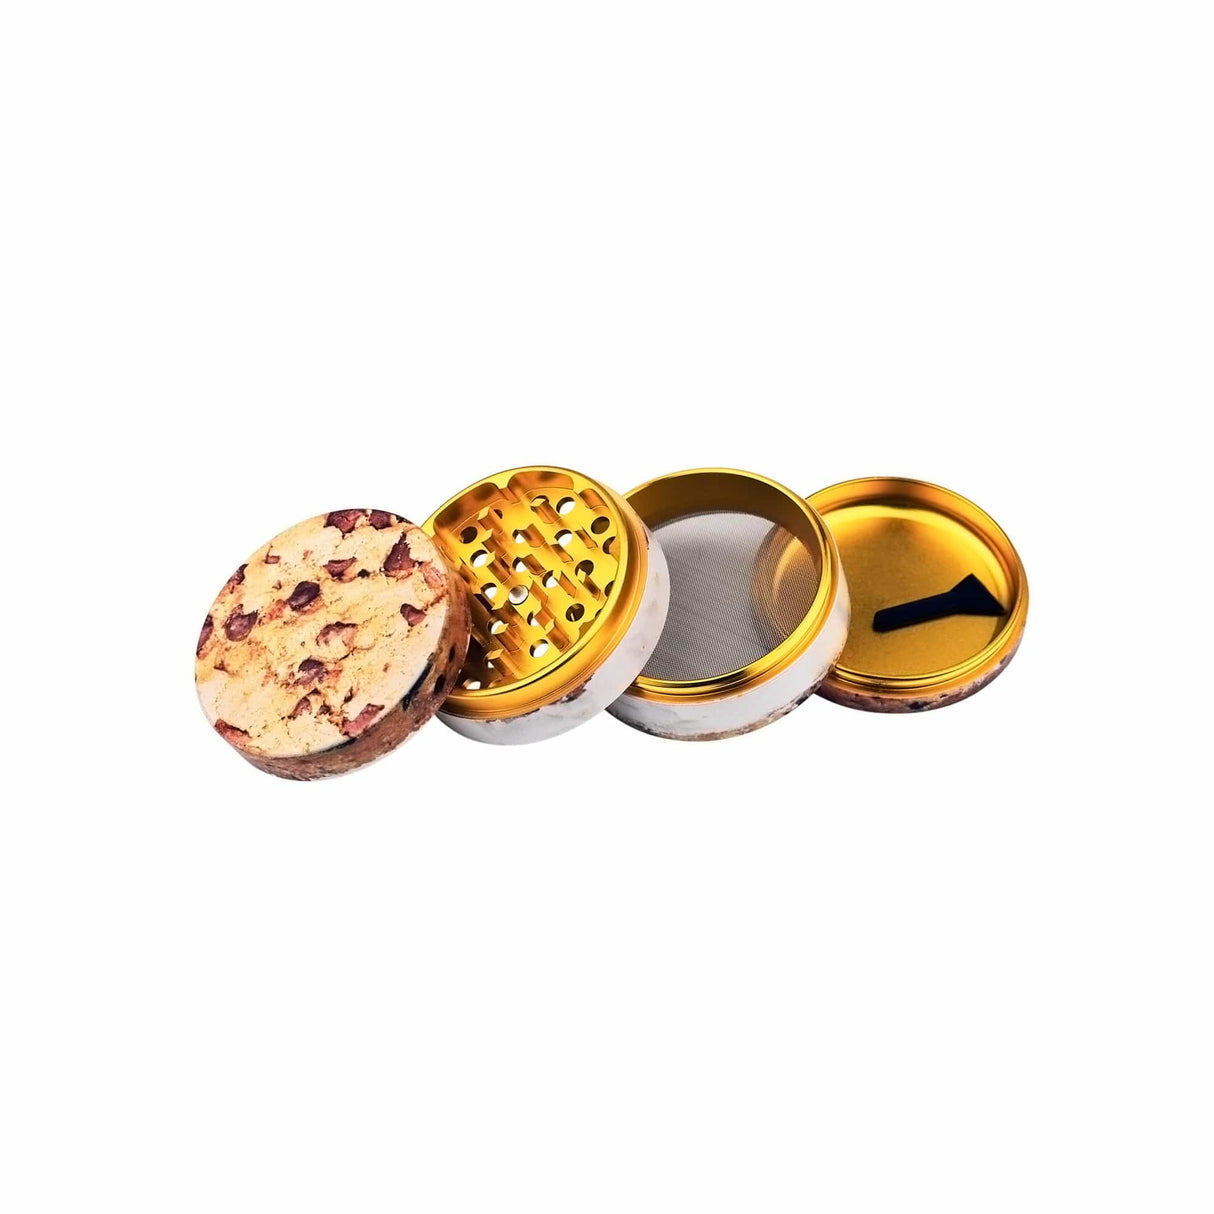 V Syndicate Ice Cream Sandwich 4-Piece Grinder open view showing sharp teeth and pollen catcher